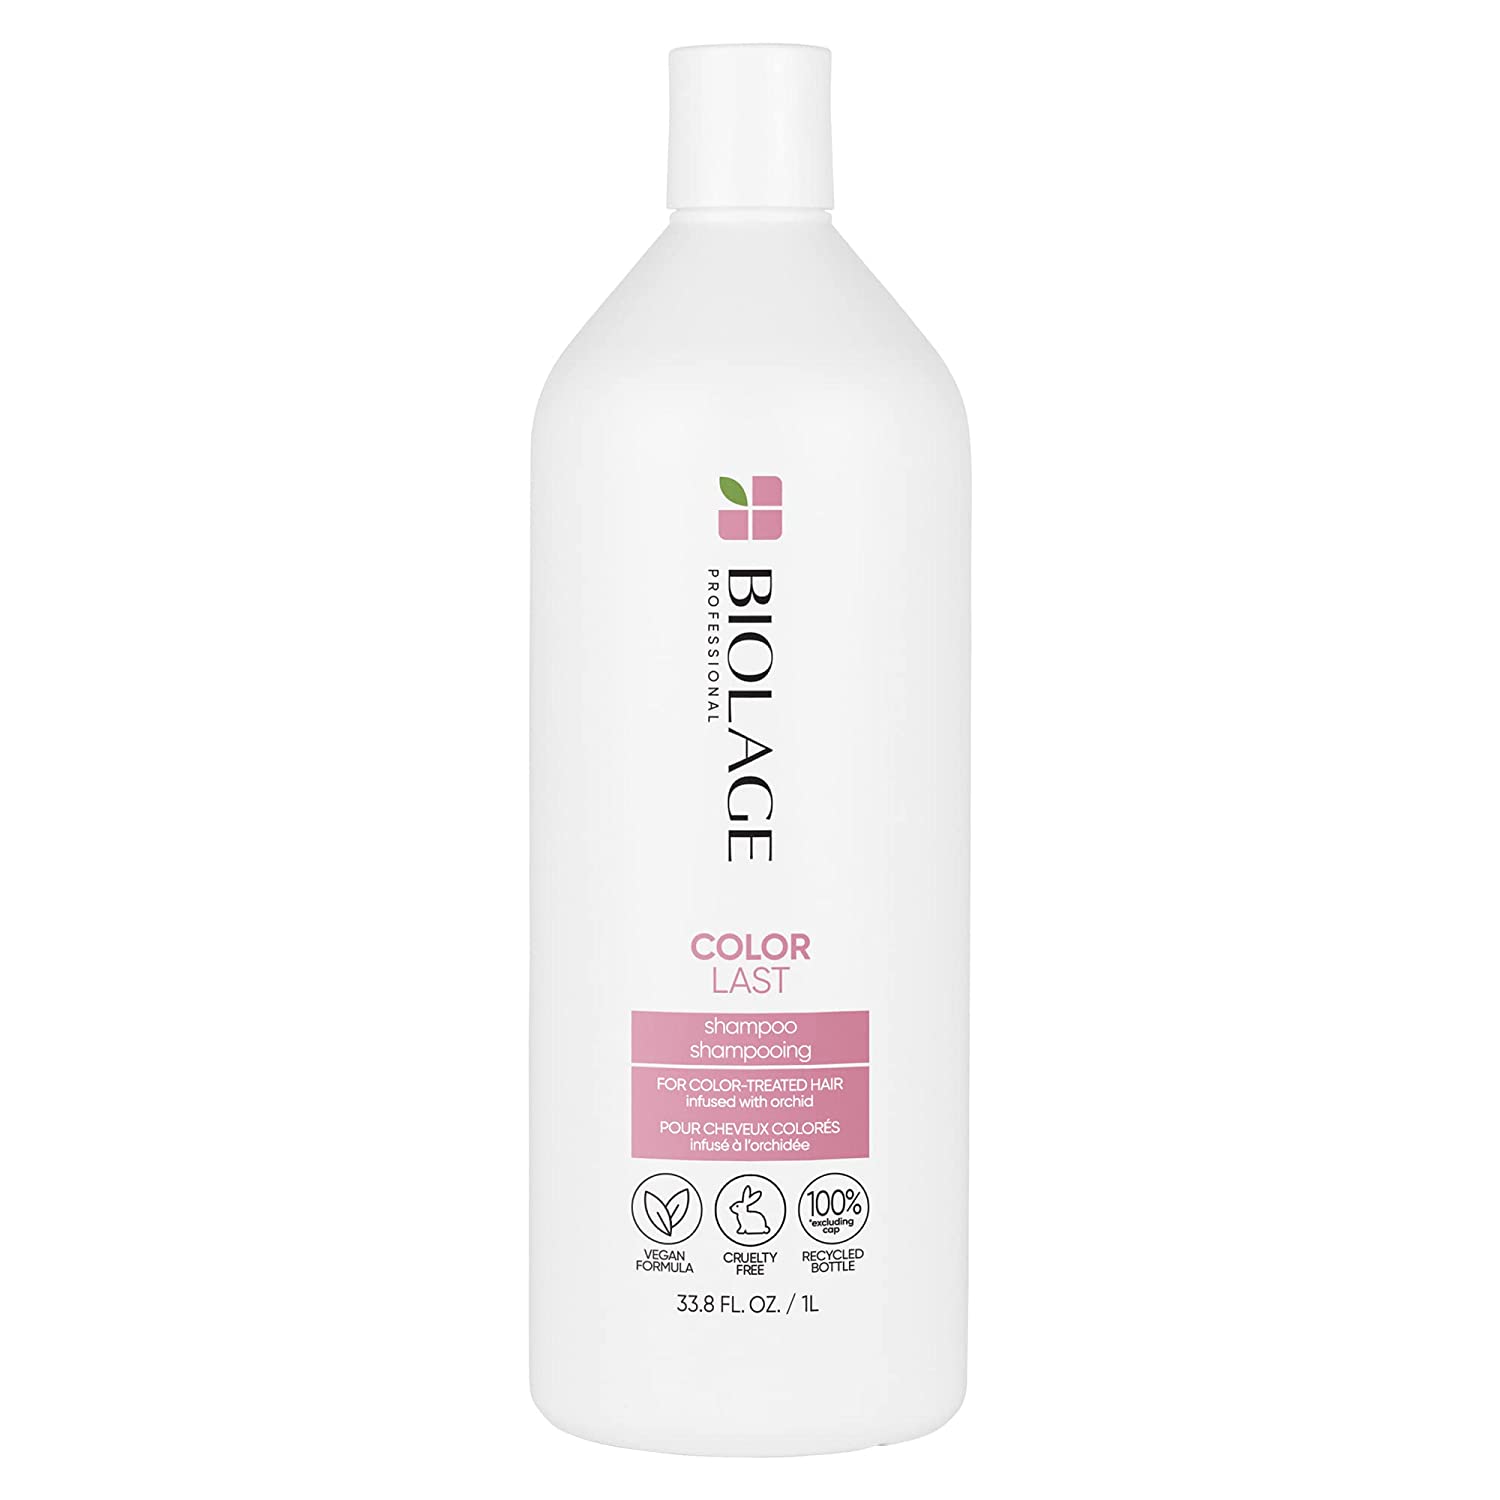 hair shampoo for colored hair product review